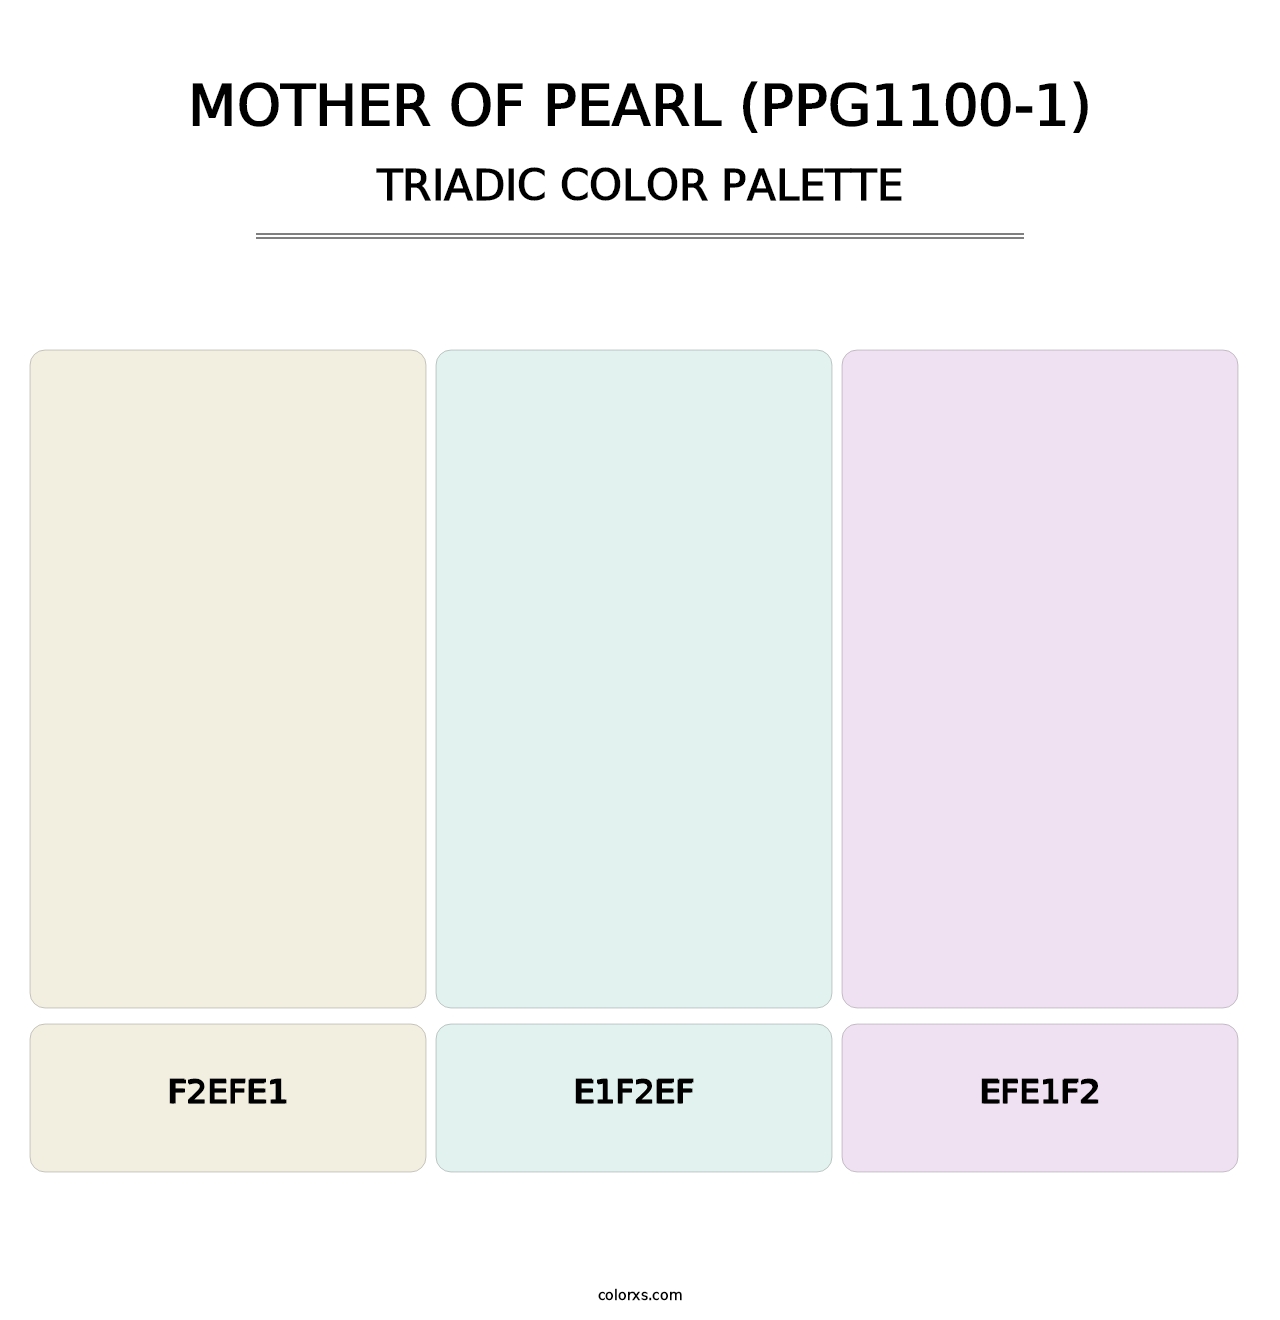 Mother Of Pearl (PPG1100-1) - Triadic Color Palette